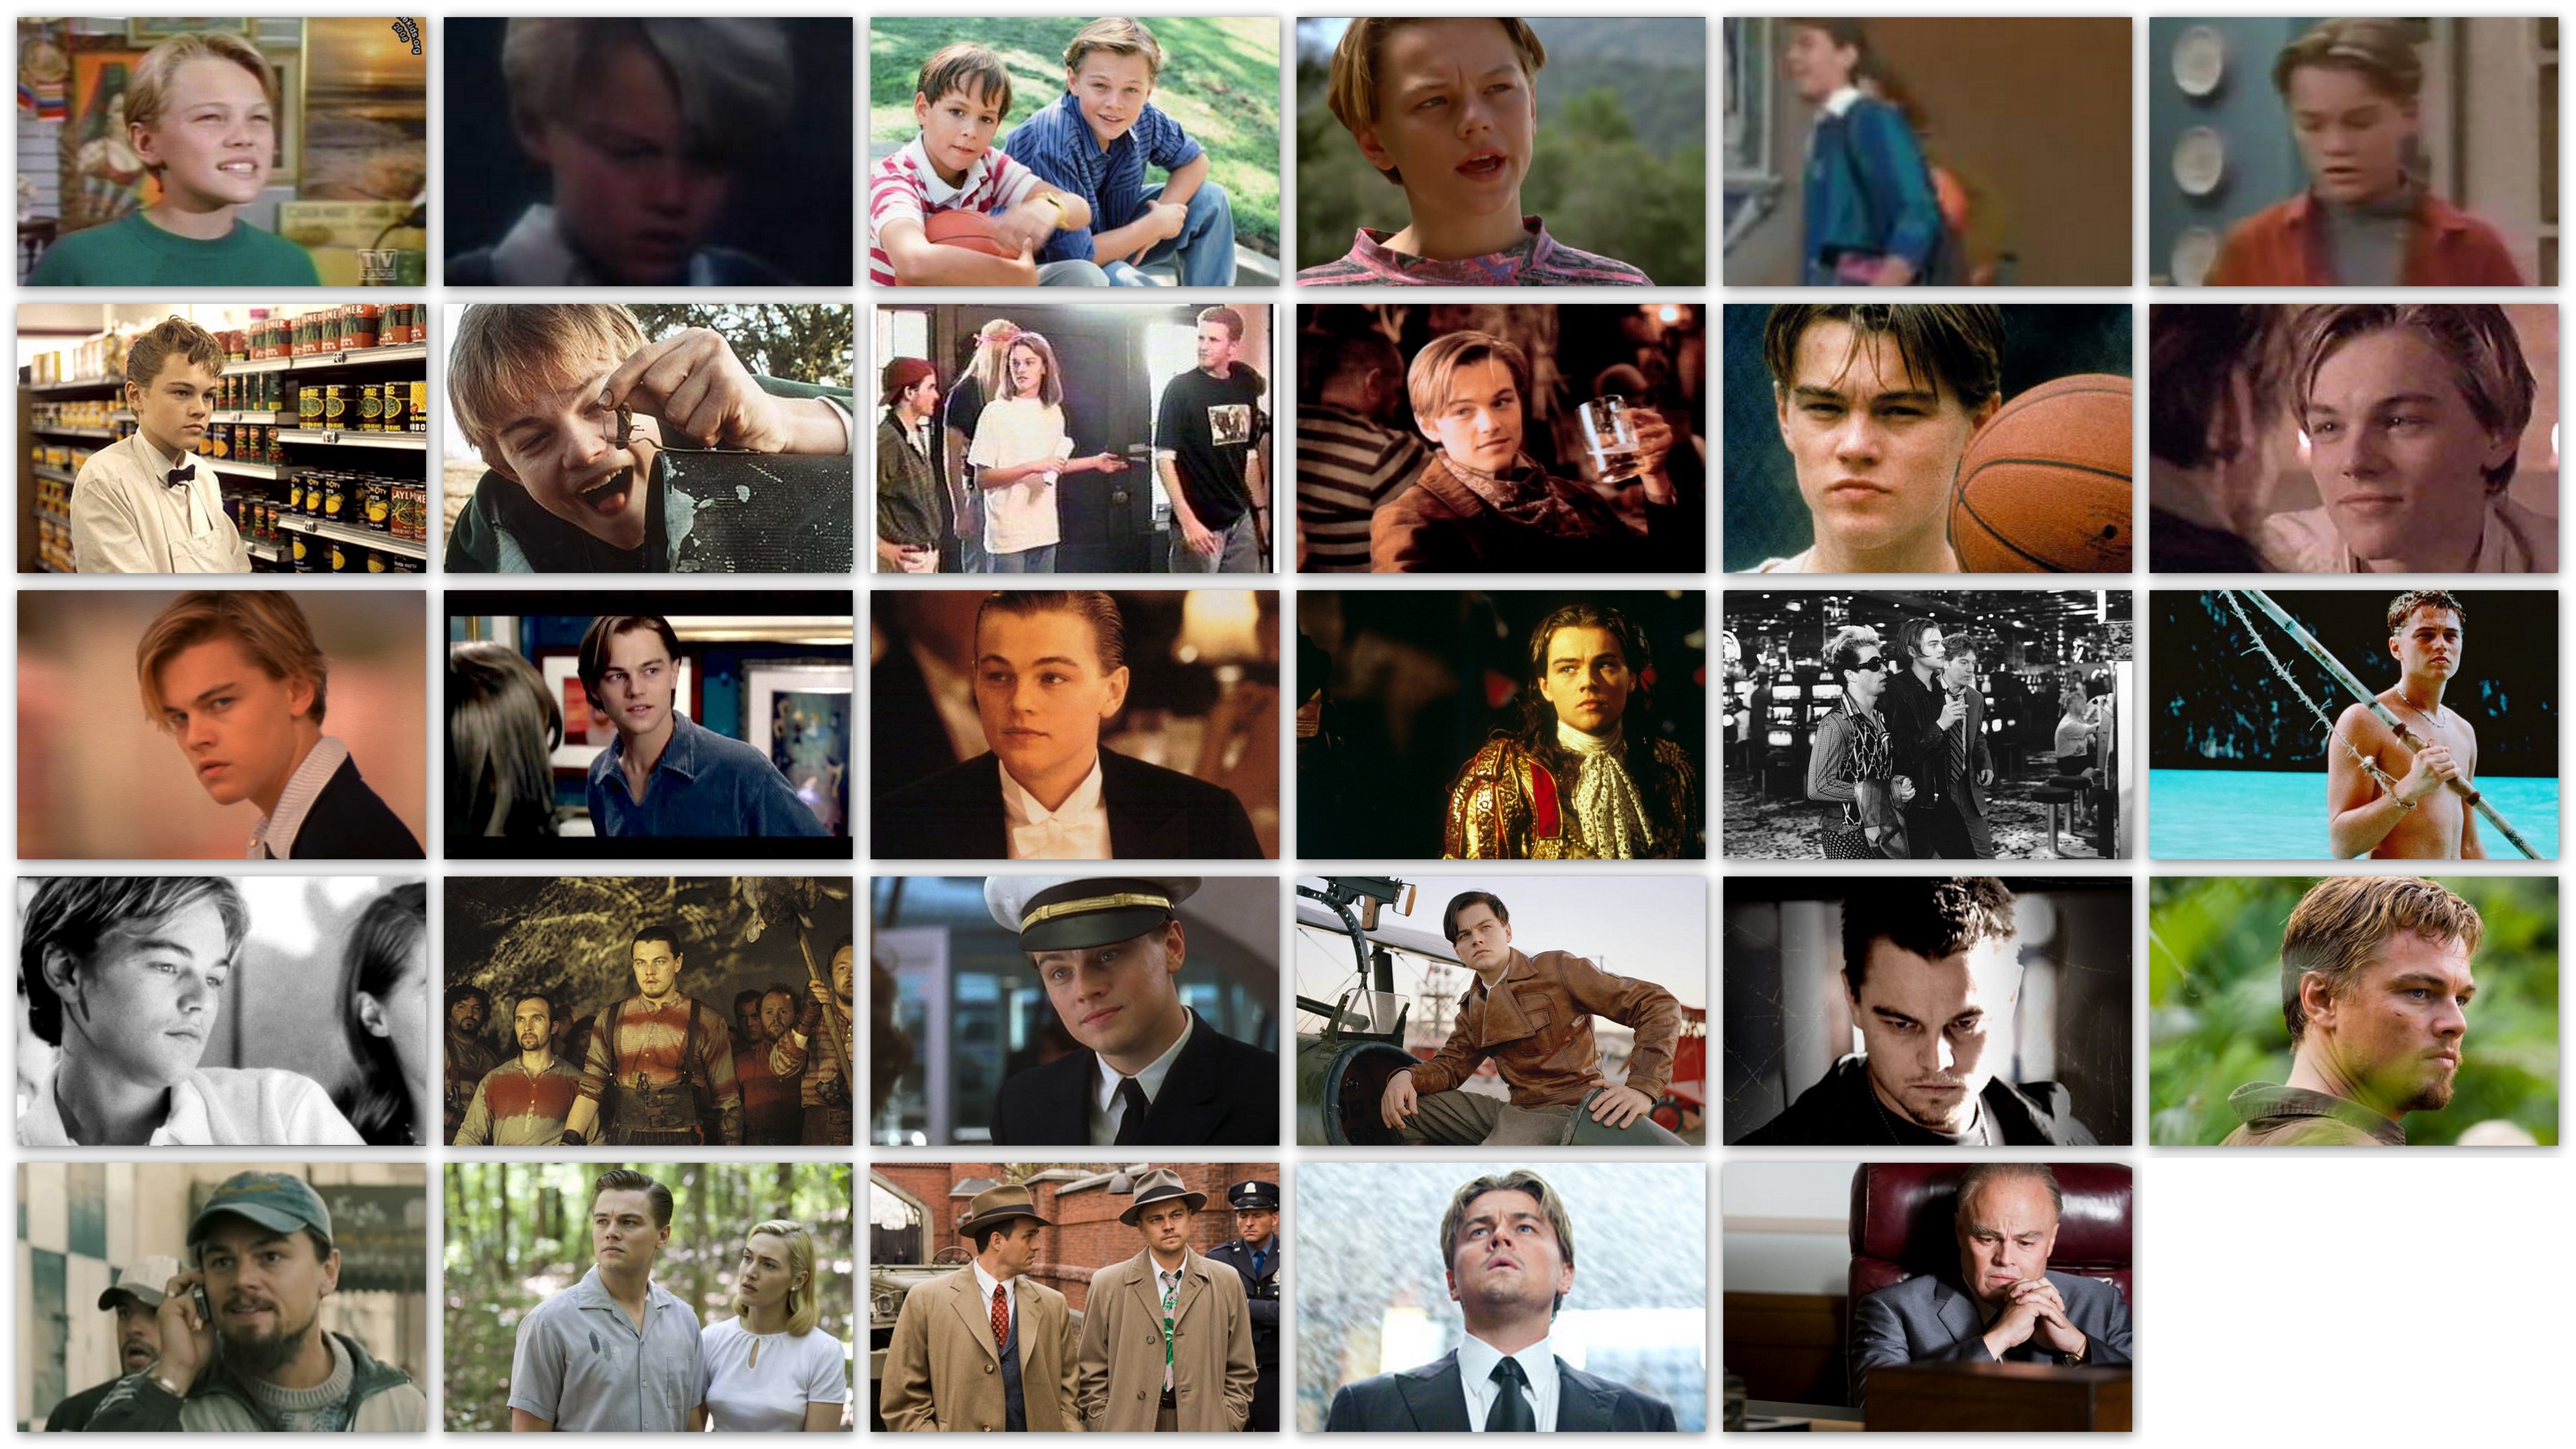 An overview of the roles of Leonardo DiCaprio